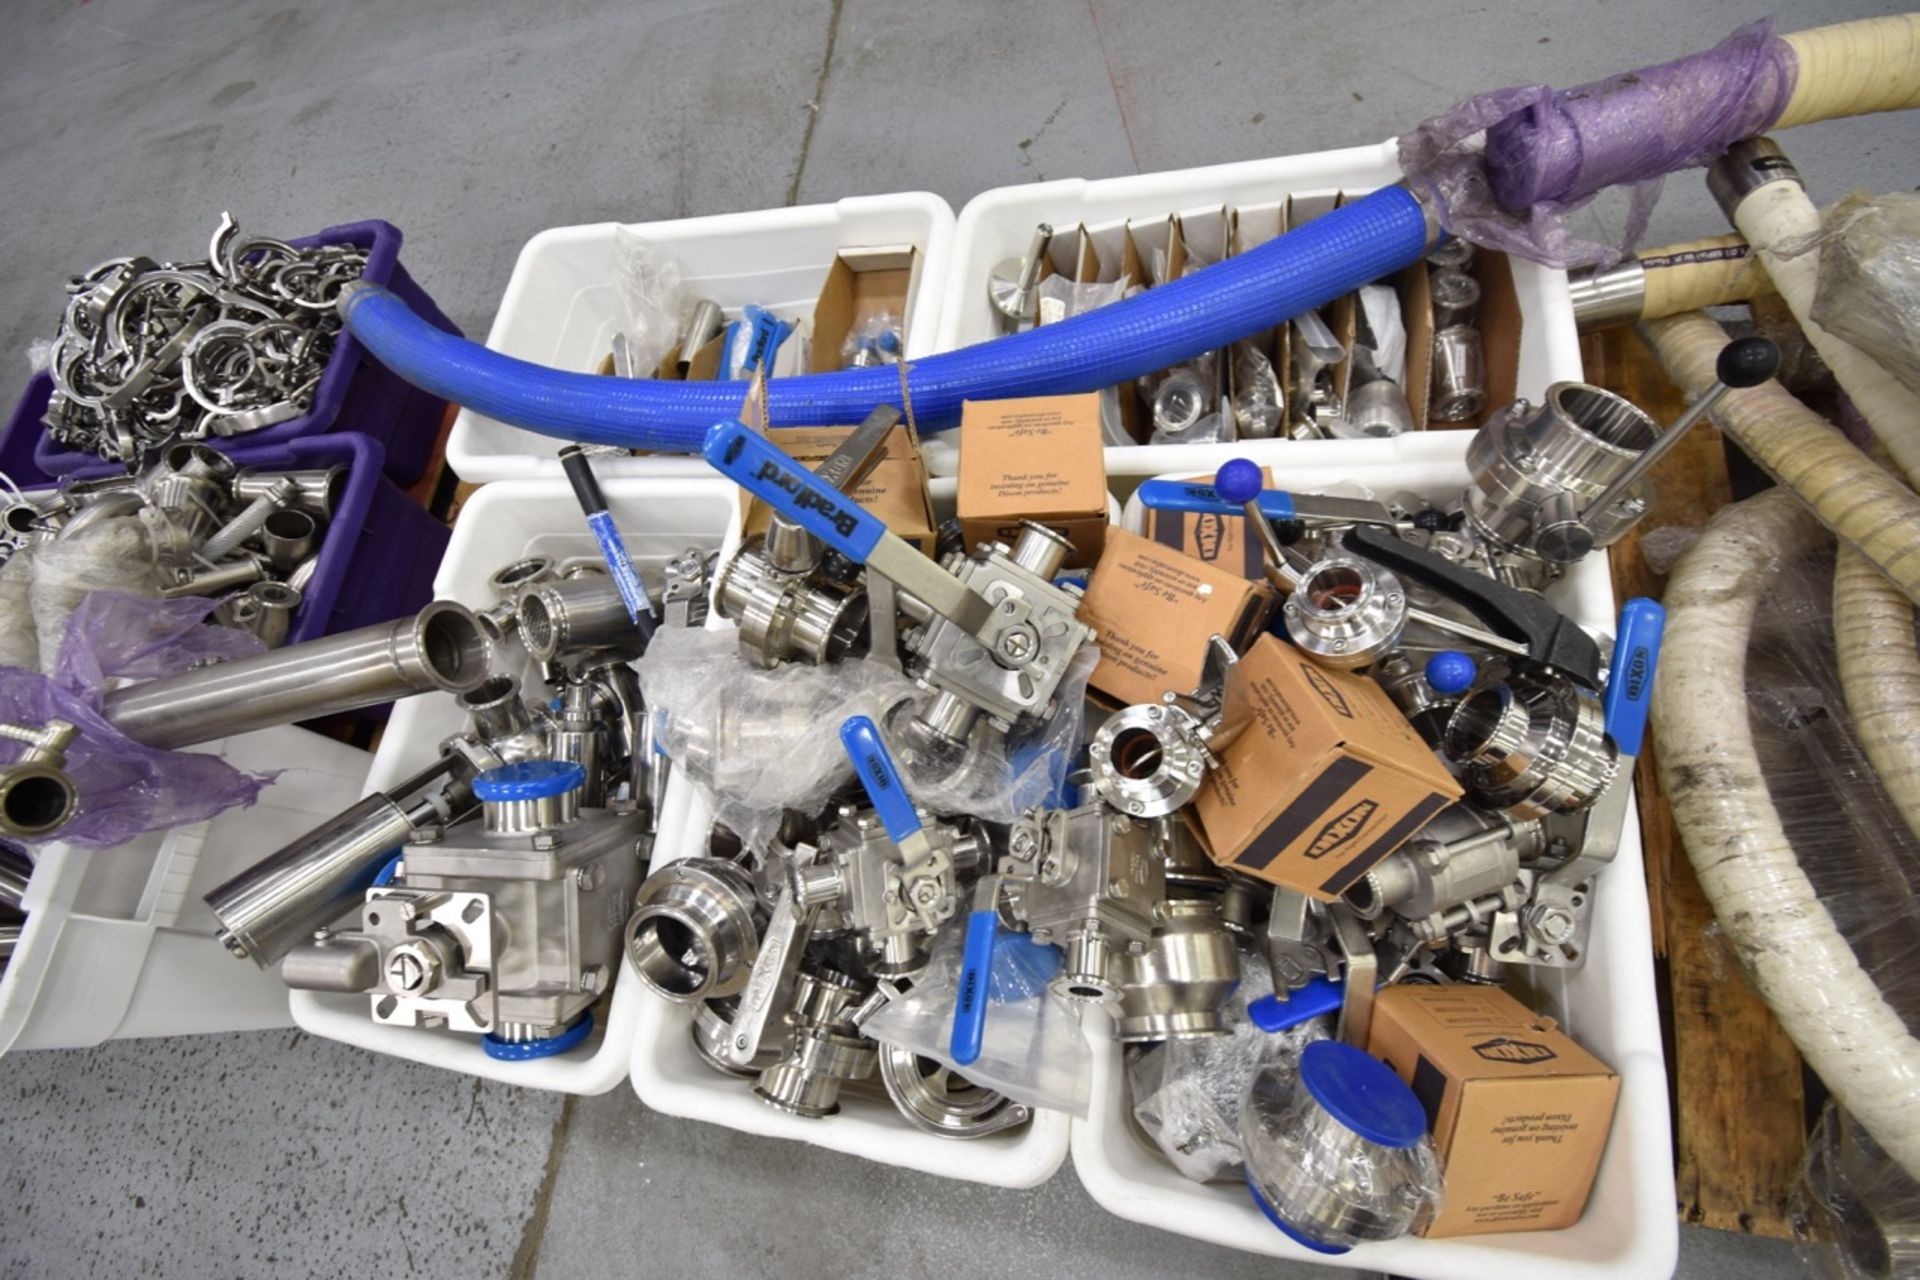 Ruland, Stafford- Dixon | miscellaneous stainless steel sanitation piping parts. Emech. Valves,